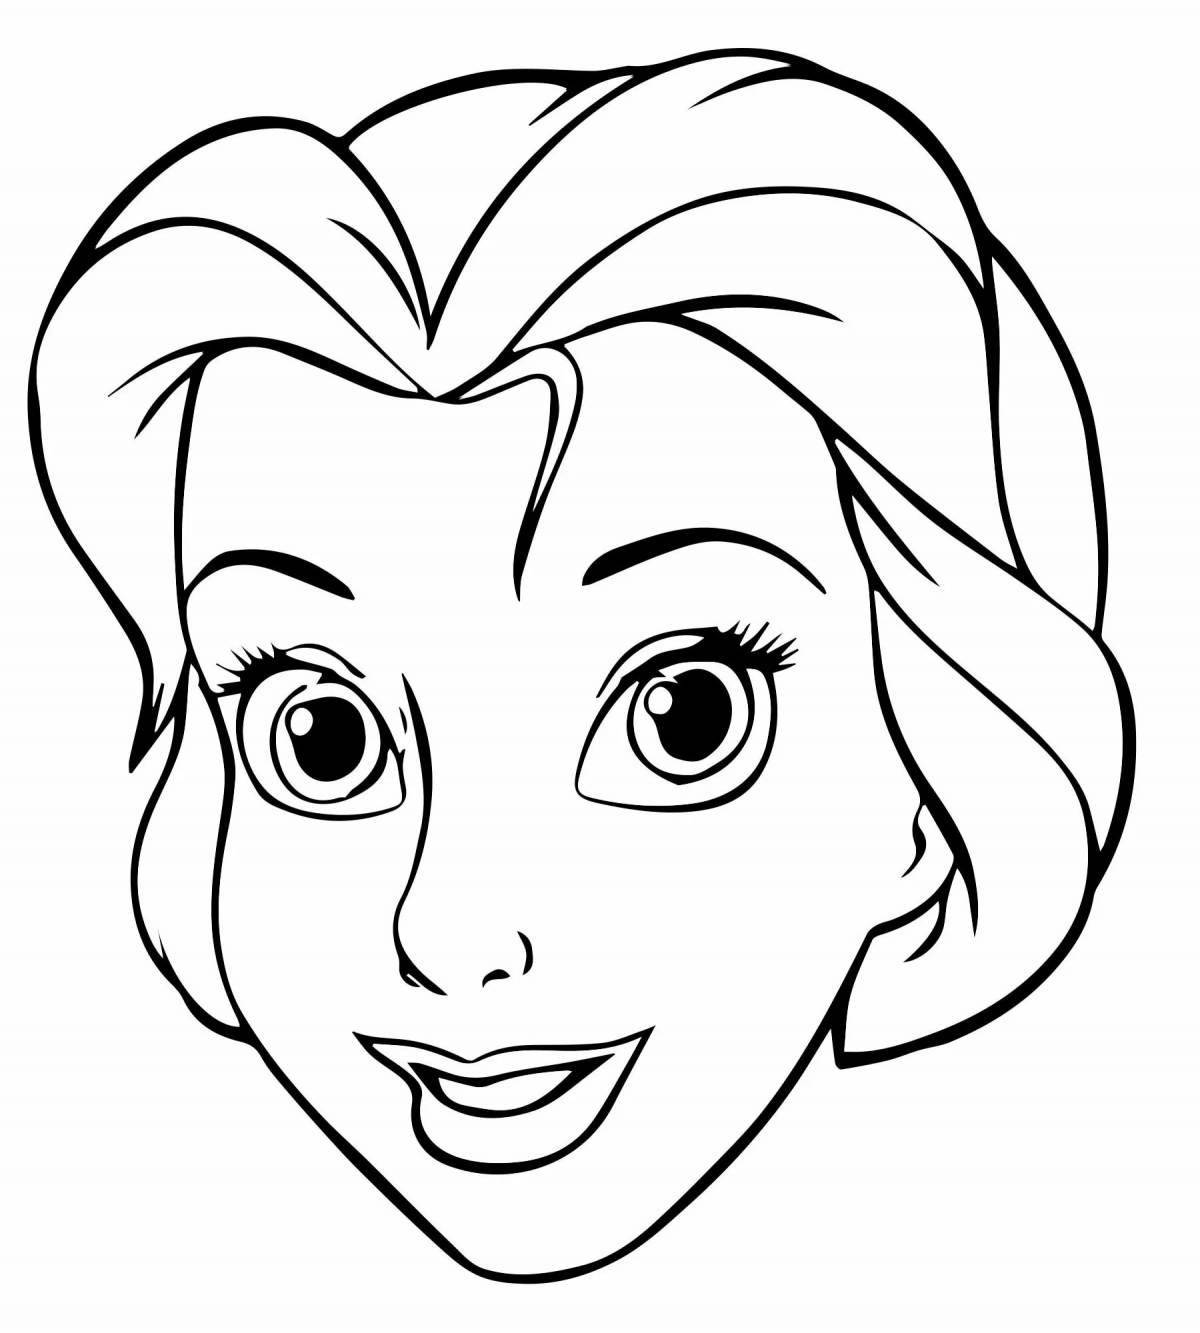 Amazing face coloring page